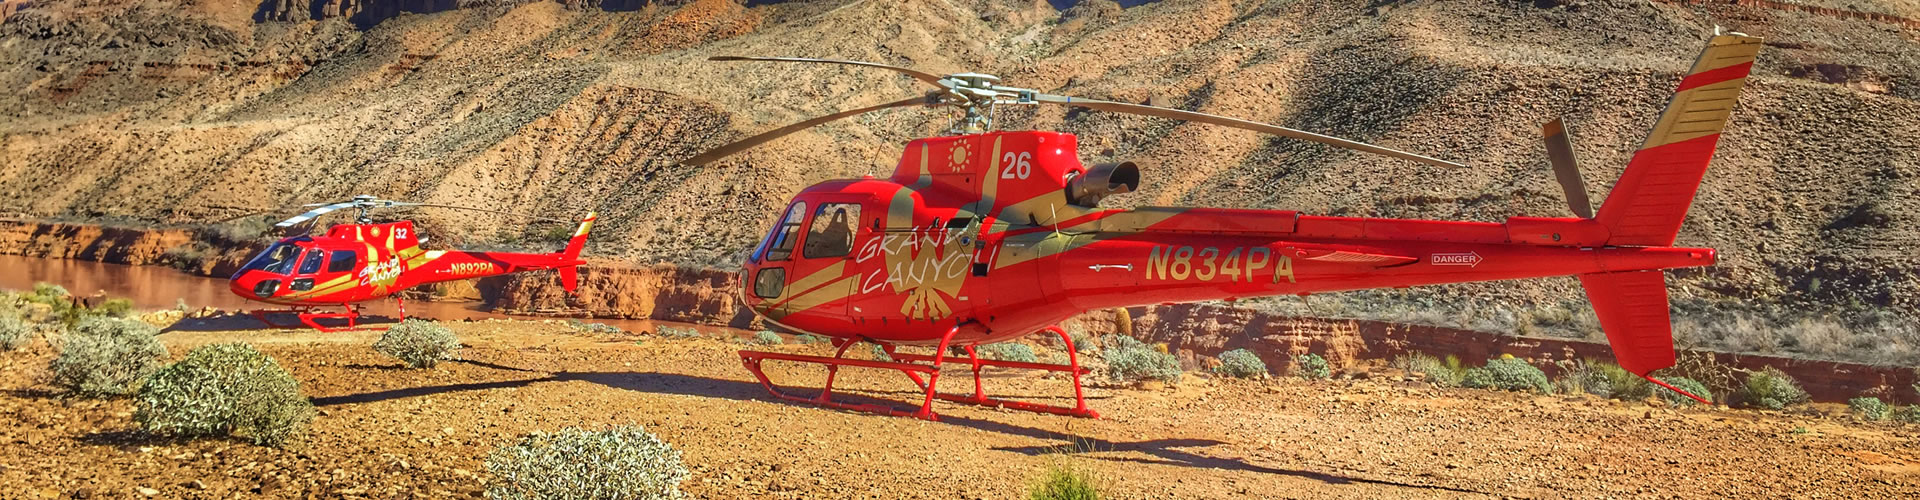 A-Star AS350 helicopters next to Colorado River